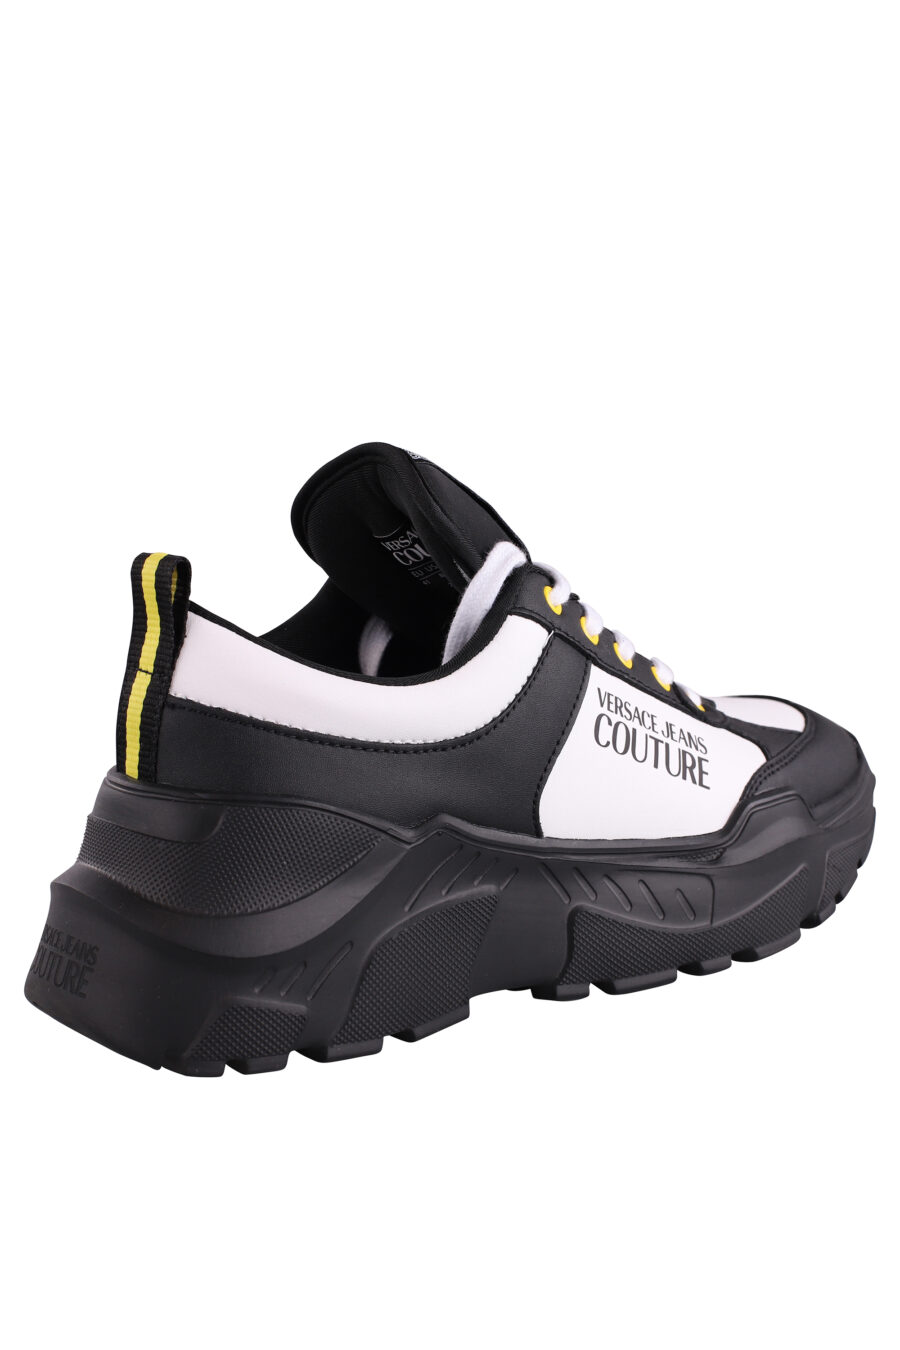 Black and white bicolour trainers with logo and yellow detail - IMG 9069